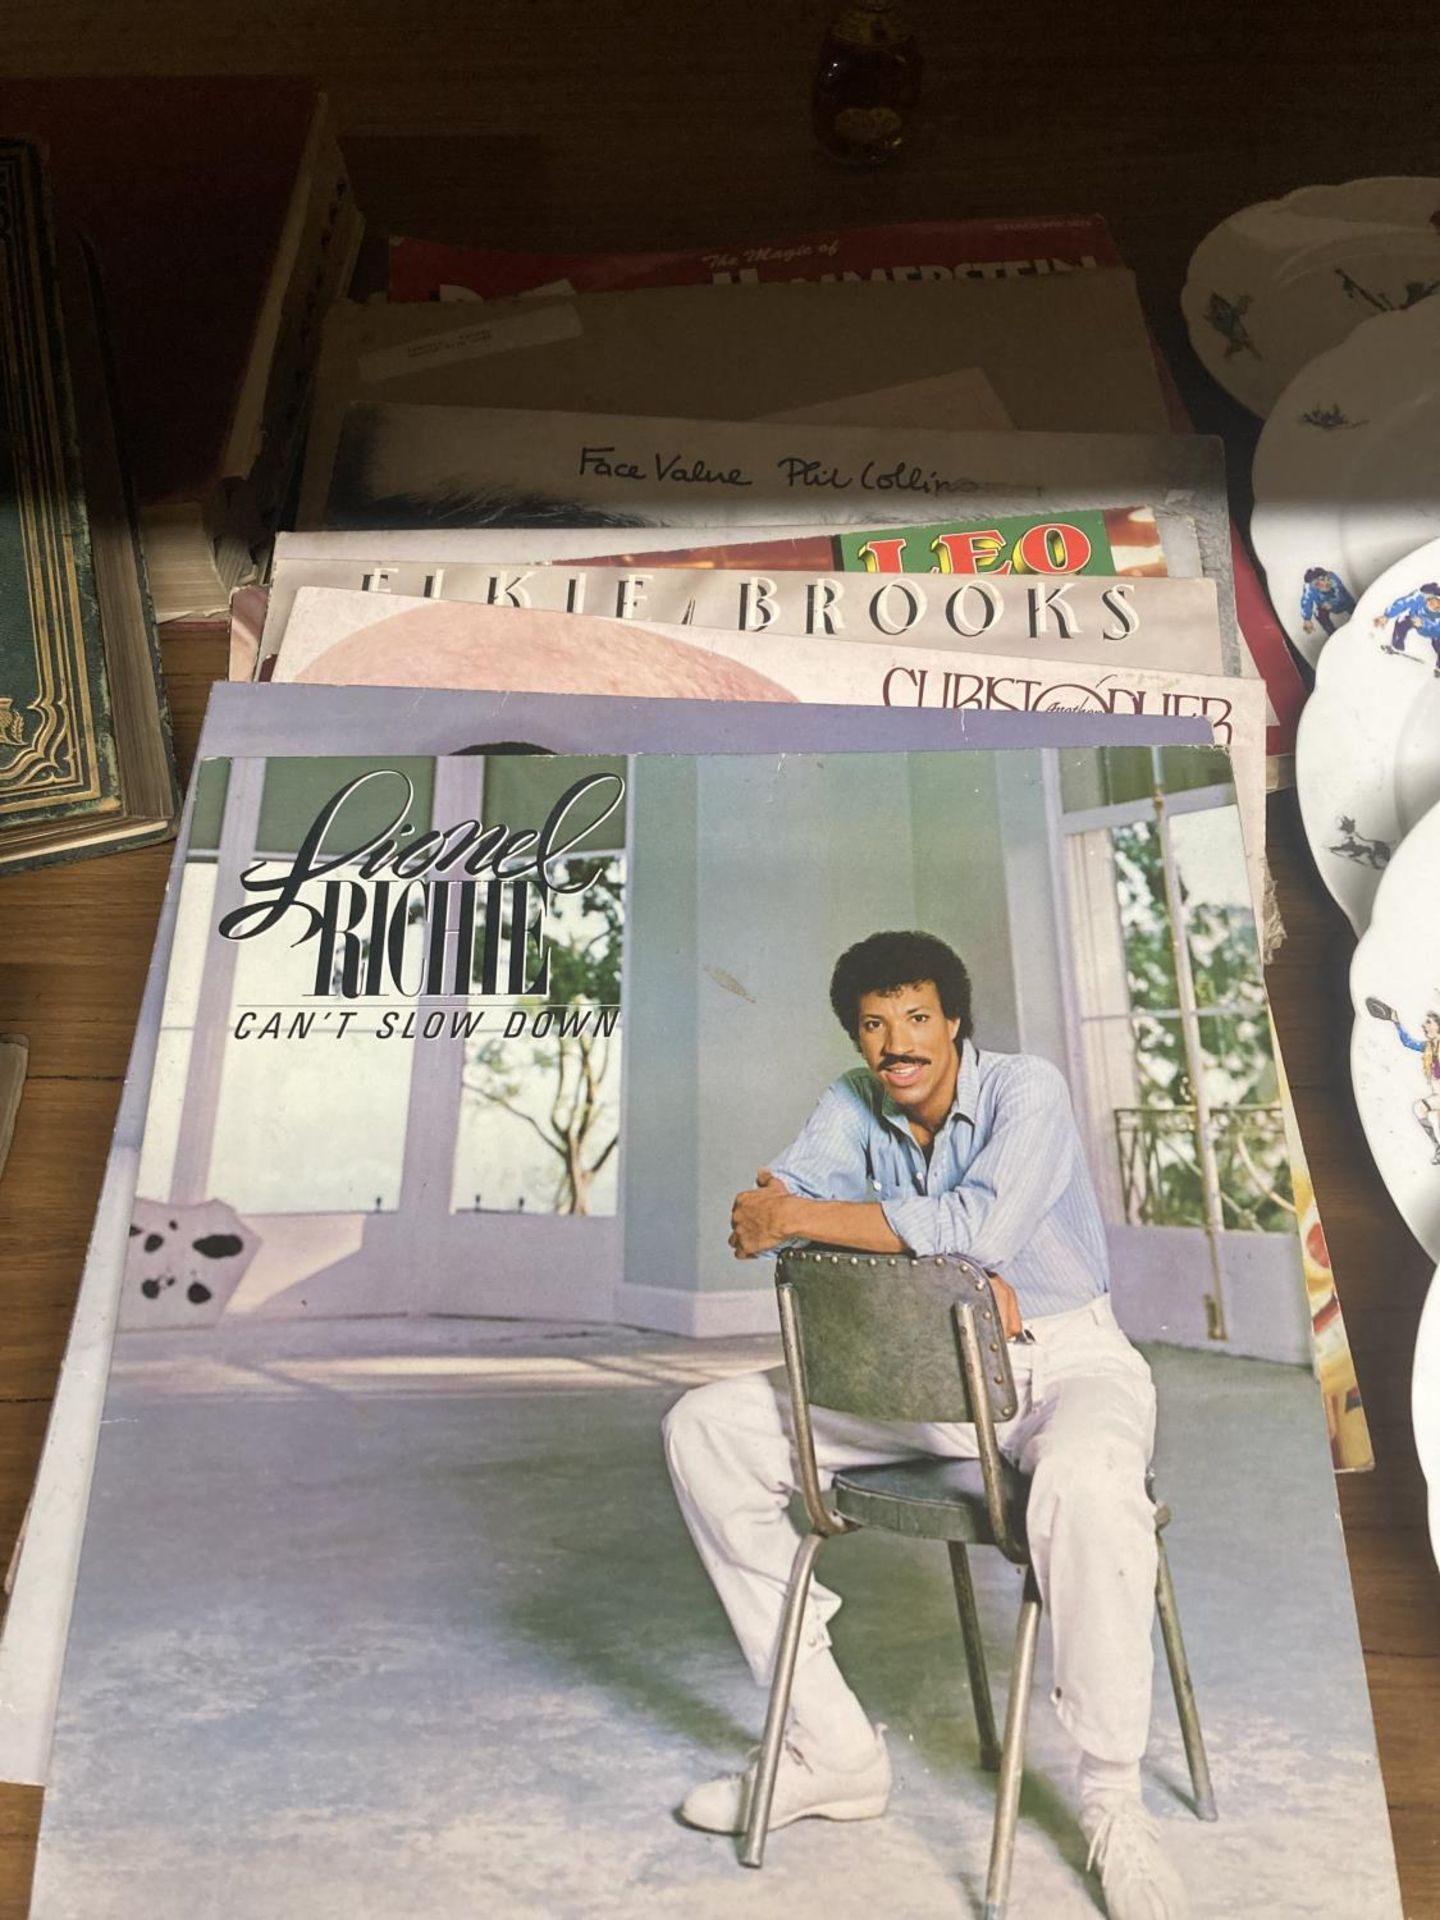 A QUANTITY OF 33RPM LP RECORDS TO INCLUDE ELKIE BROOKS, GEORGE BENSON, LIONEL RICHIE, LEO SAYER,